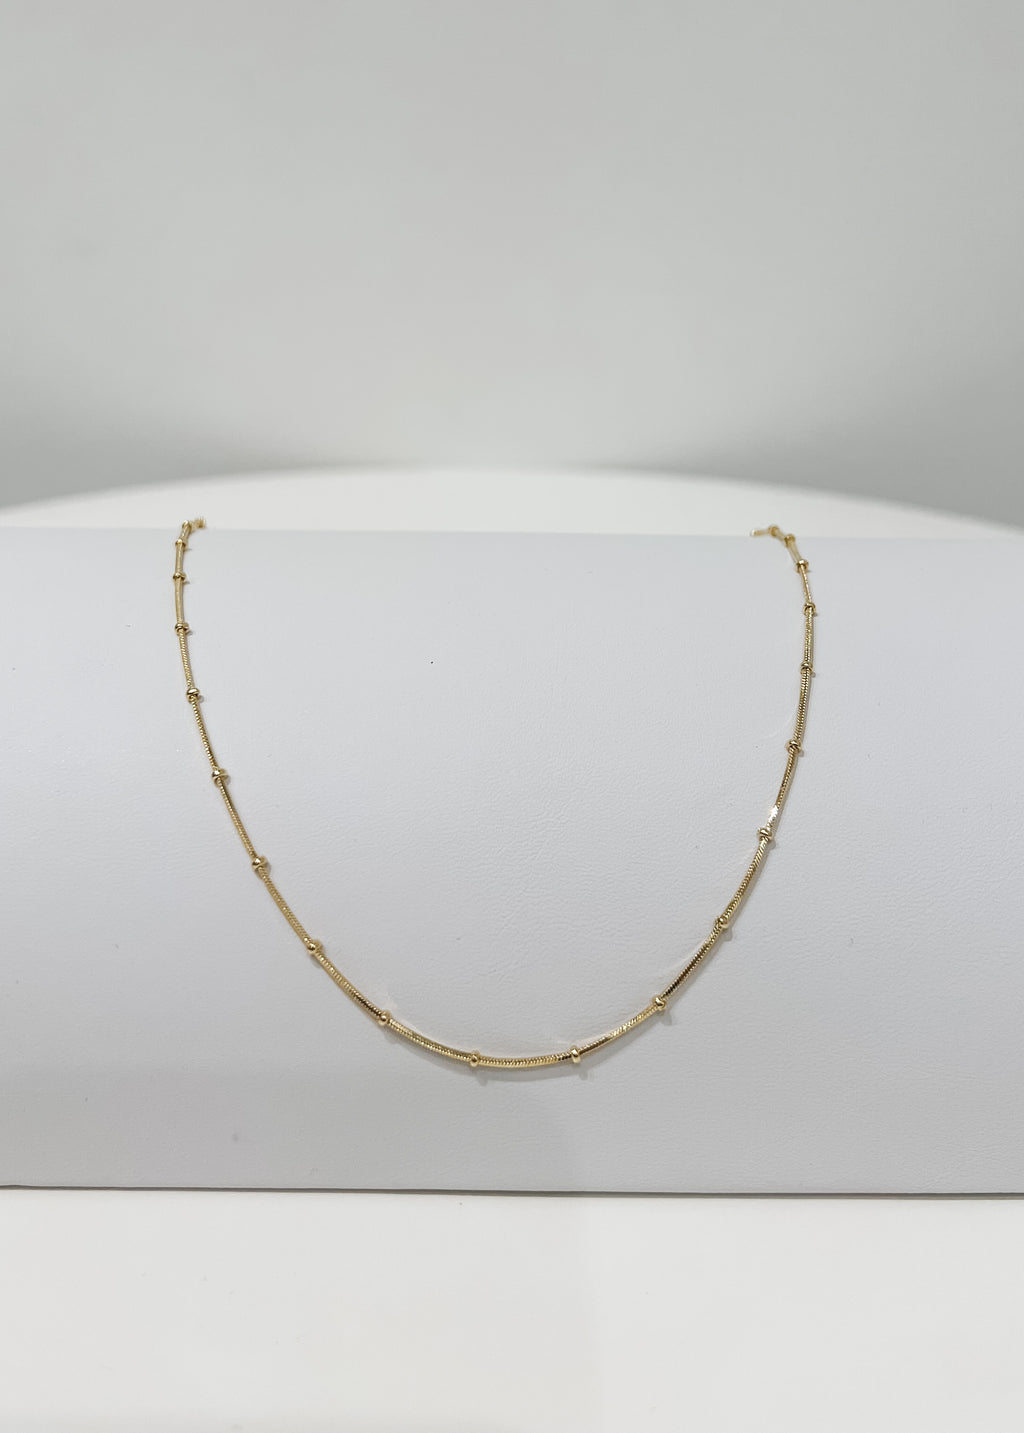 Thin ball necklace, gold